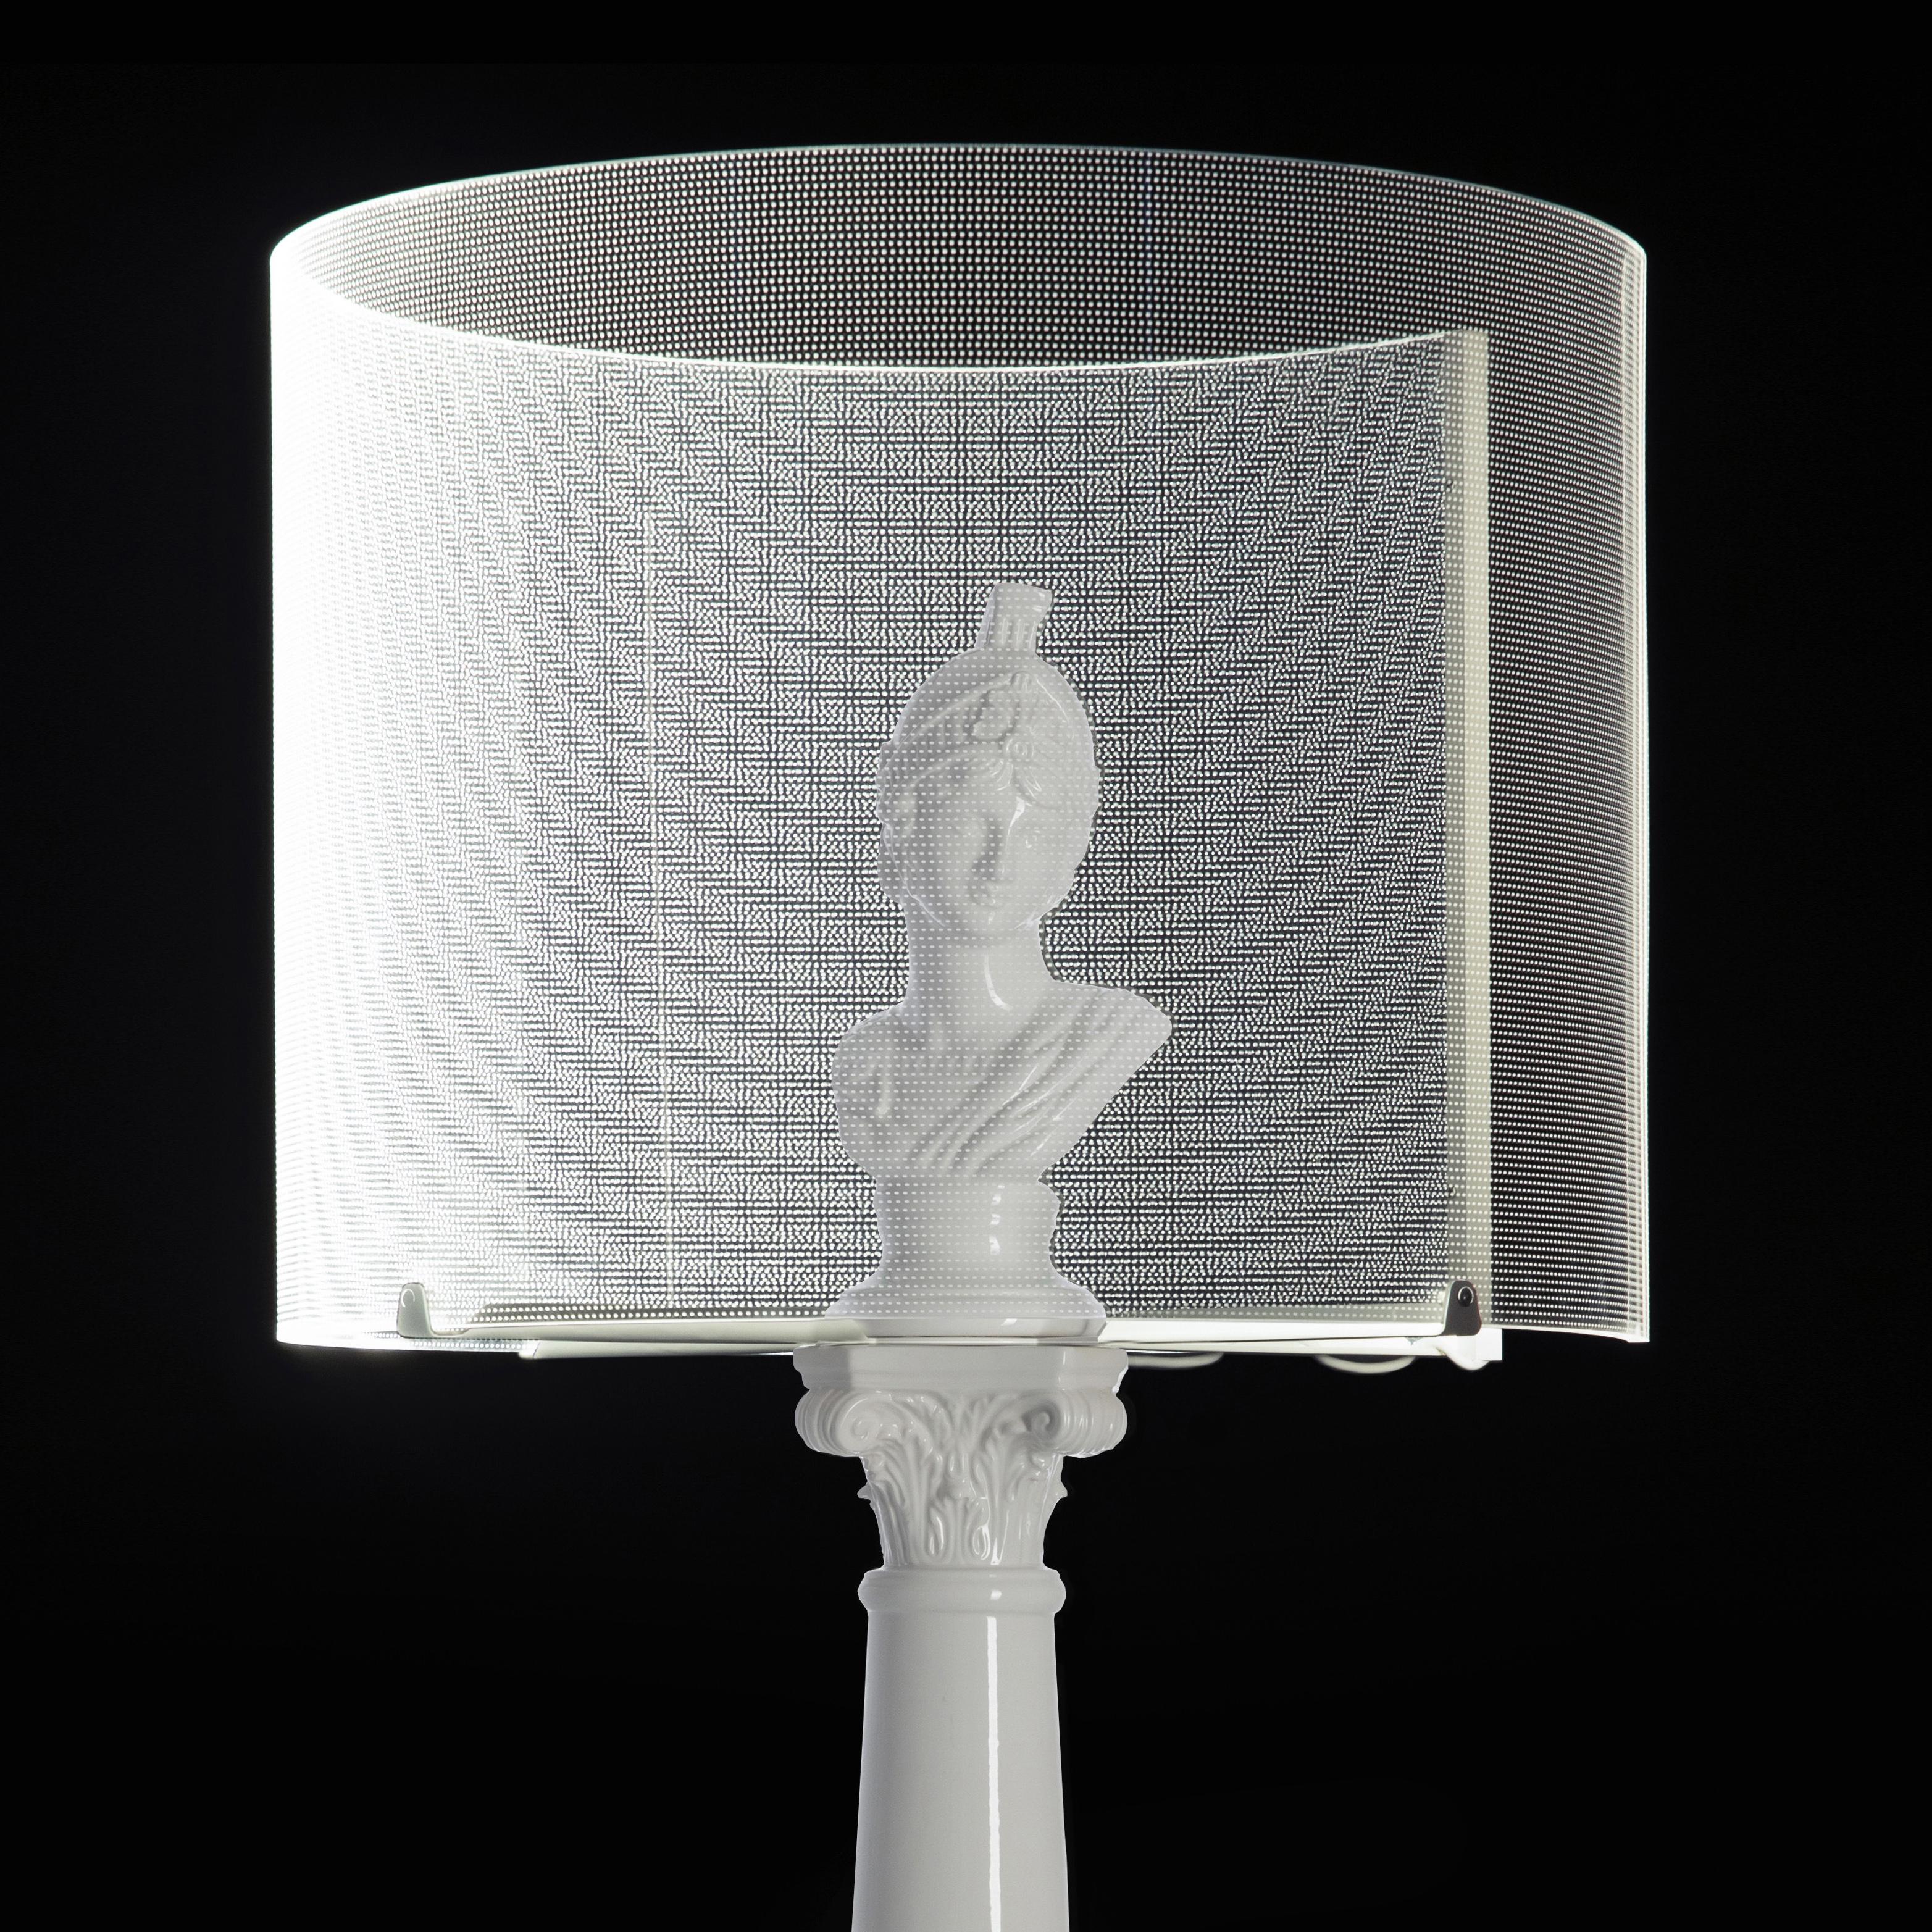 This elegant table lamp brings together innovation and Classical myth for a unique lighting experience. The lamp’s body is crafted from high-quality ceramic in the Venetian tradition, entirely hand-finished. Its bold personality and distinctive